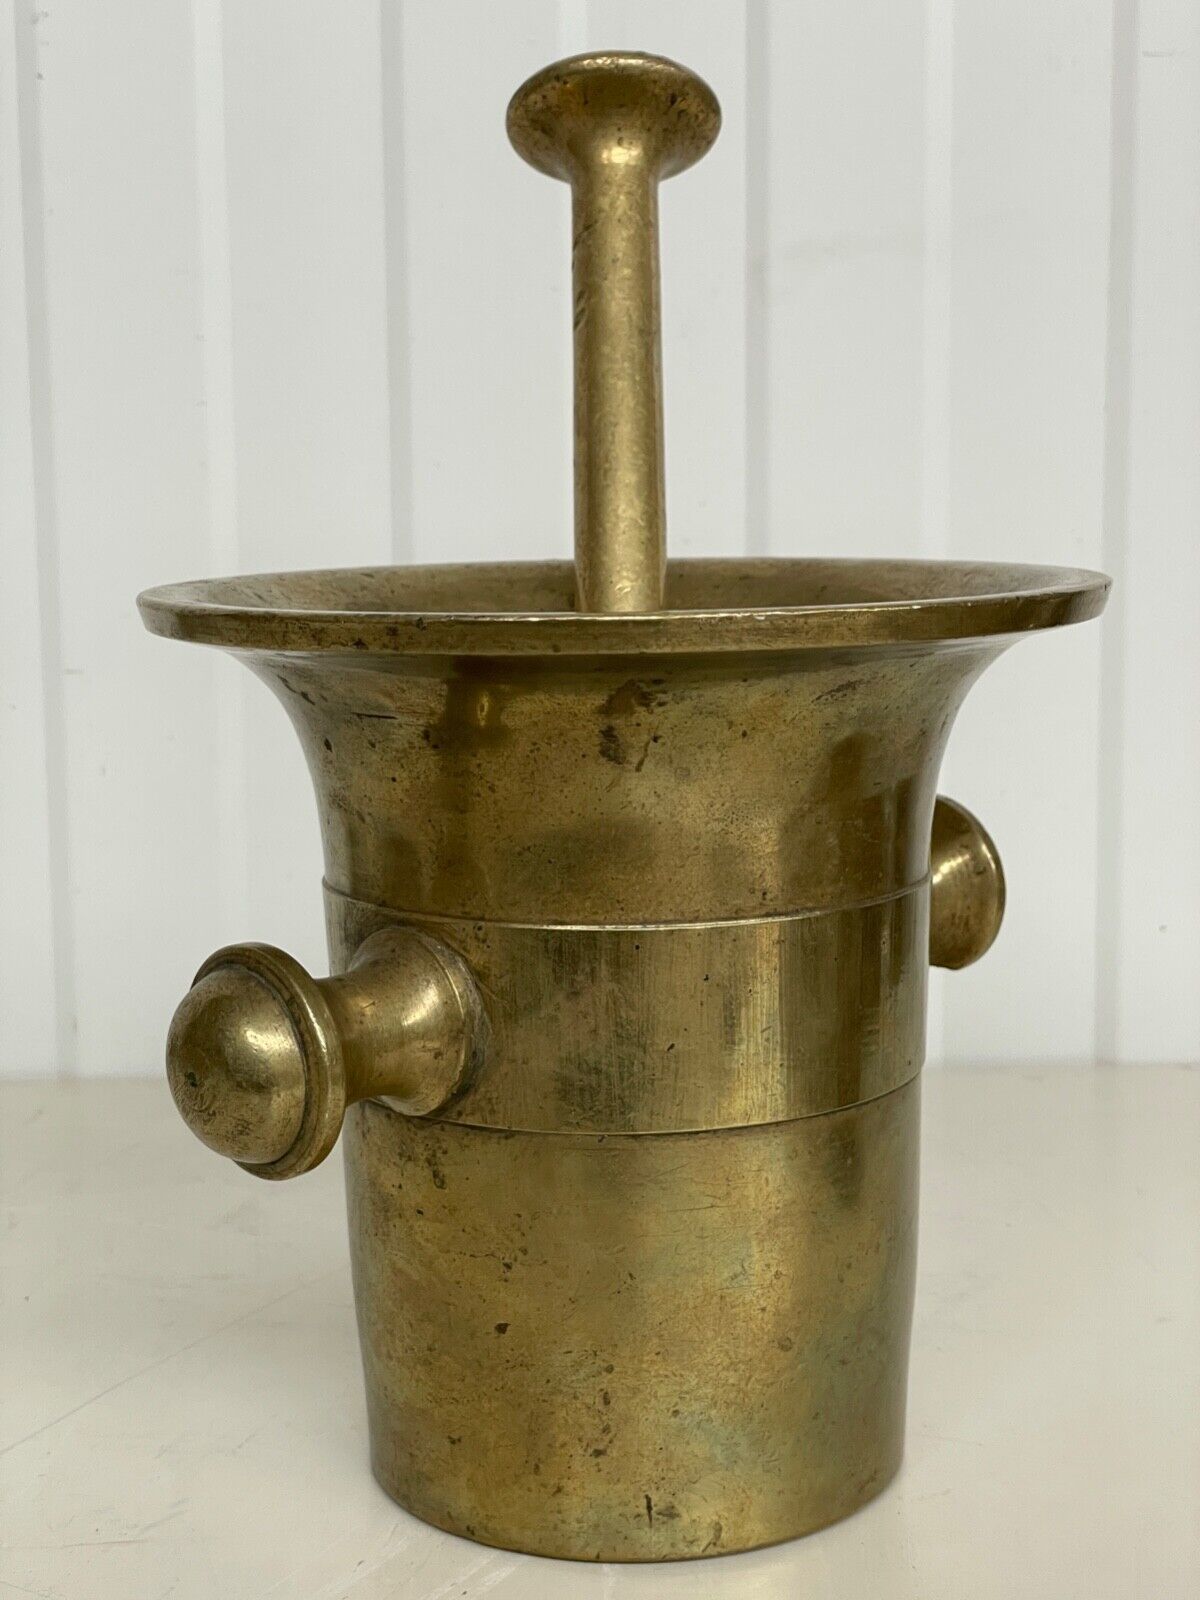 A Beautiful Brass Mortar with Pestle